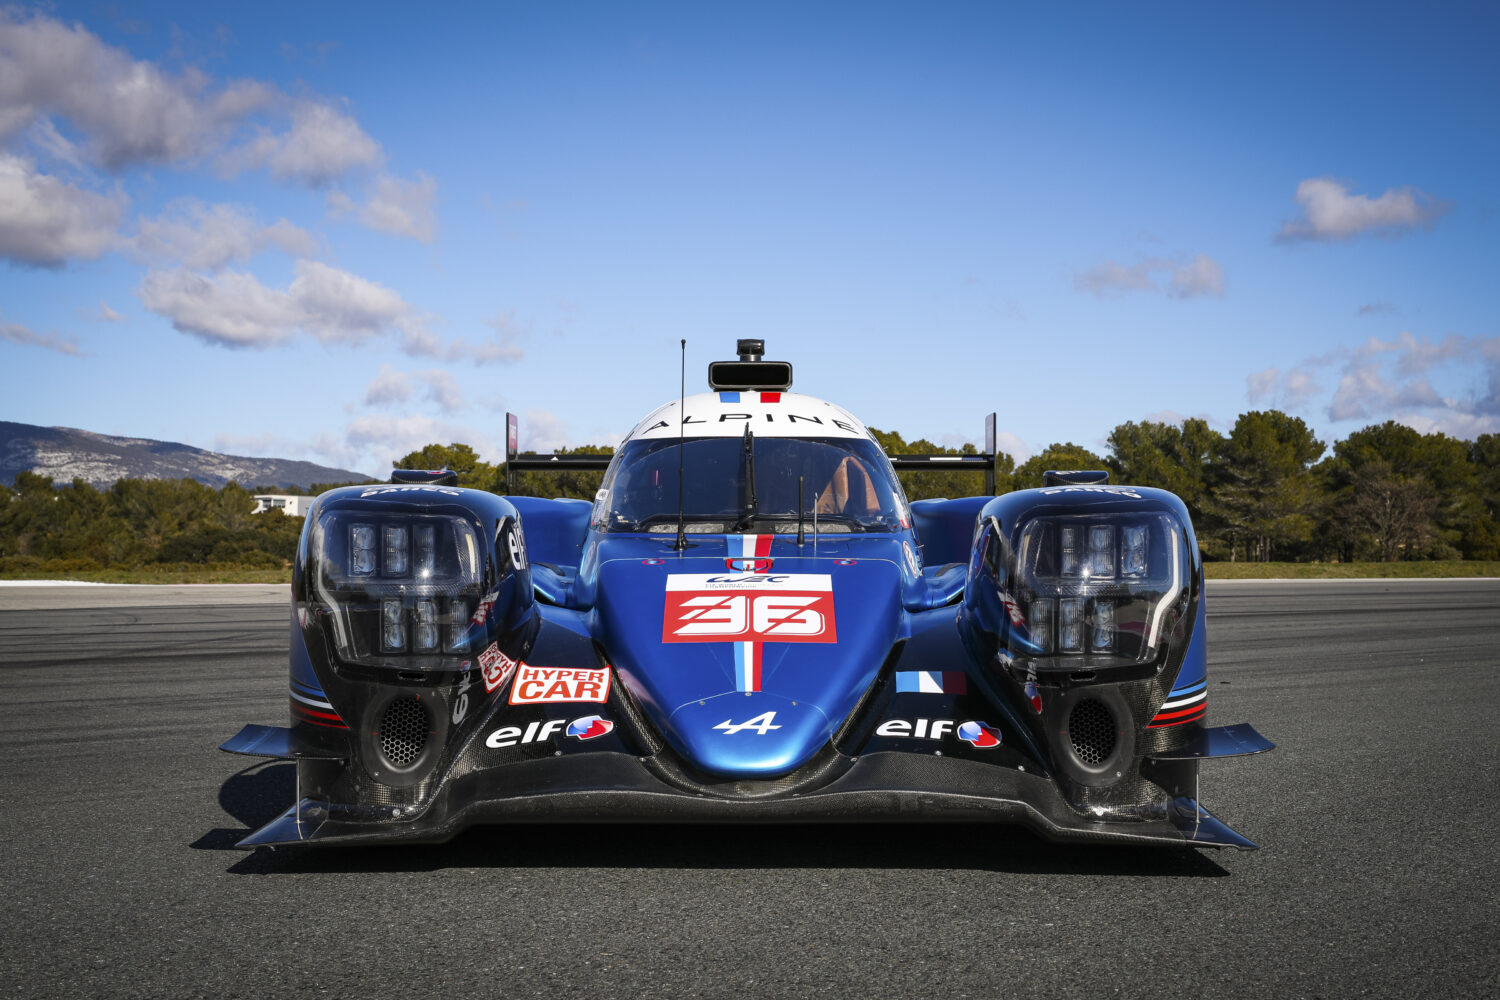 19-2022 - Alpine A480 - Tests Sessions on the Castellet circuit – Alpine A480 N°36 Alpine Elf (Lapierre - Negrao - Vaxiviere).jpeg